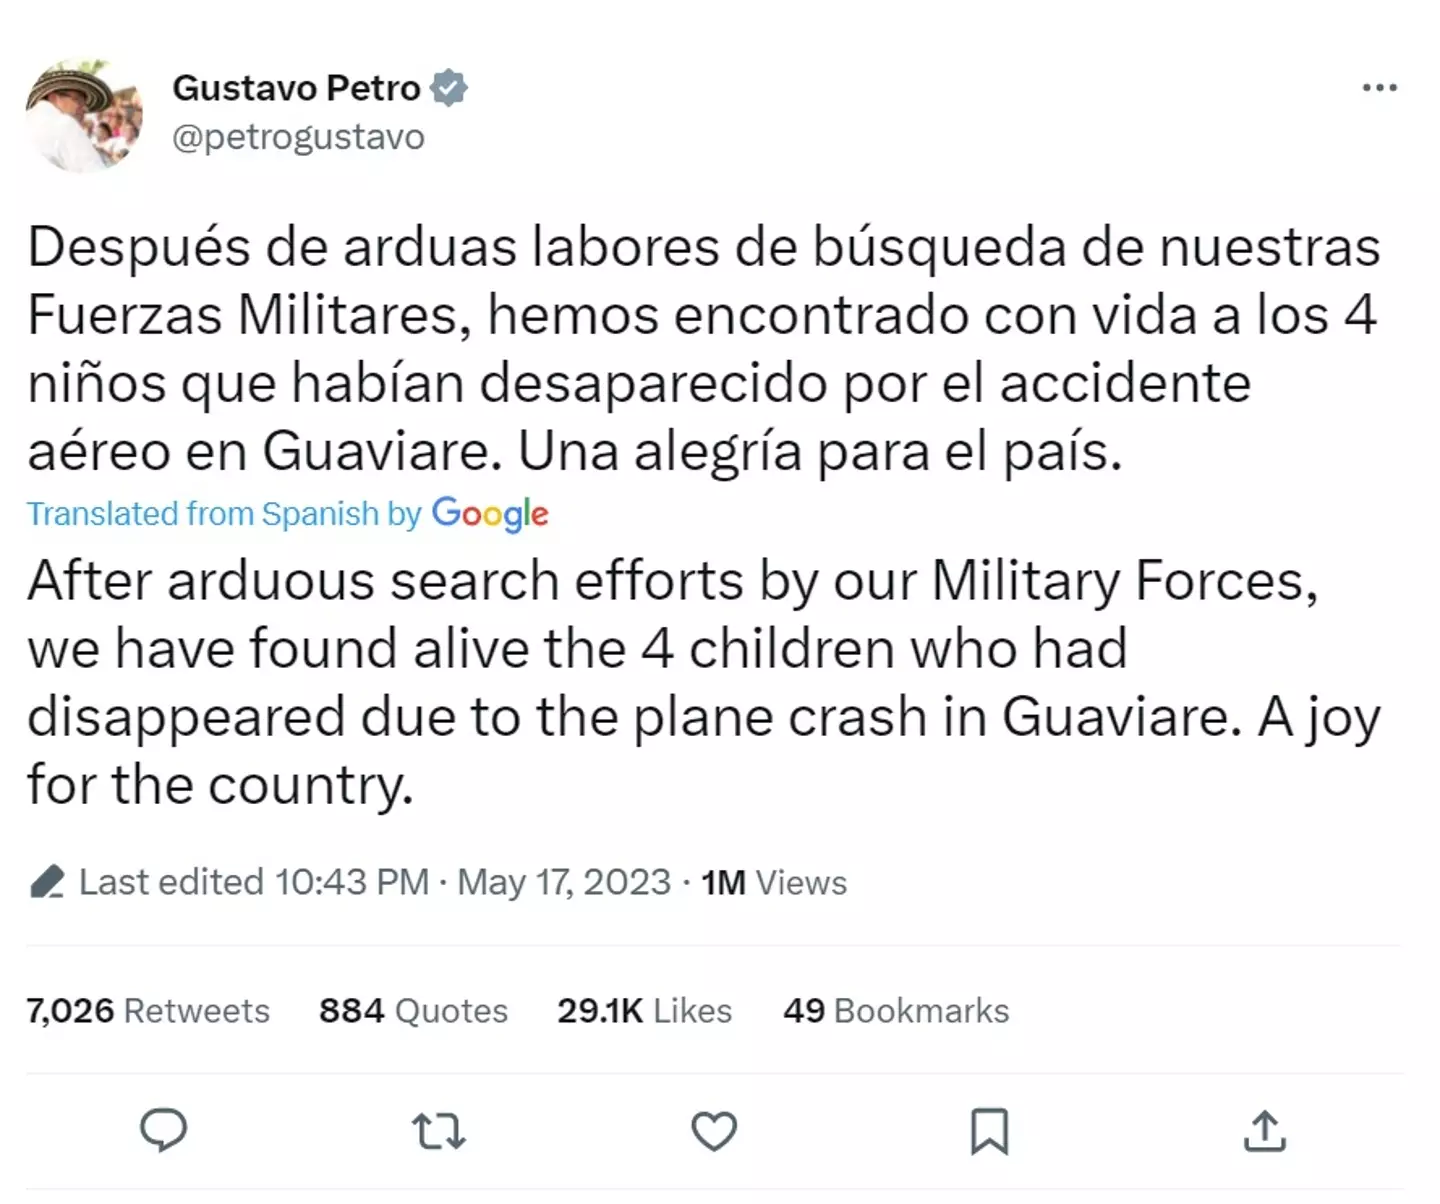 The Colombian president announced the safe discovery of four children after the plane crash.